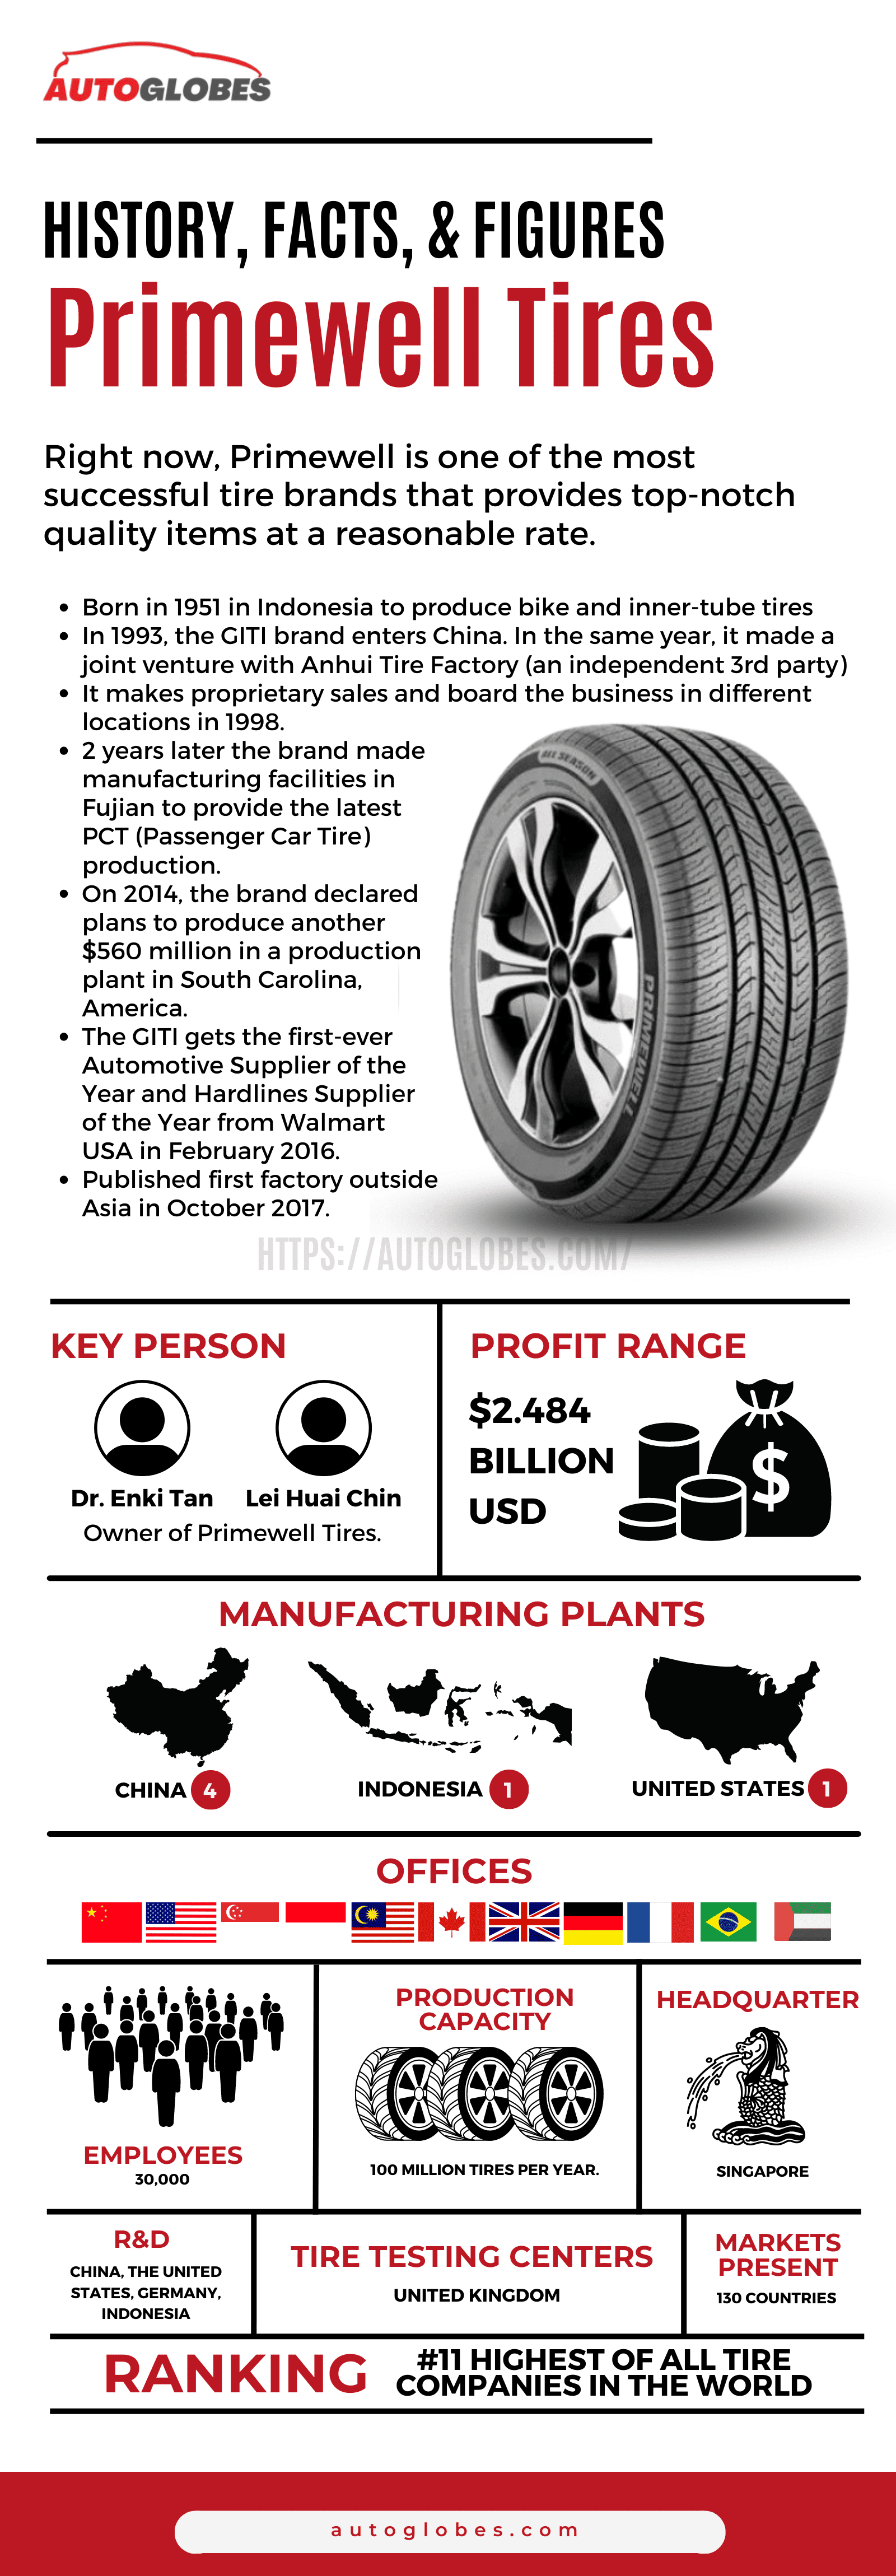 Primewell Tires Infographic